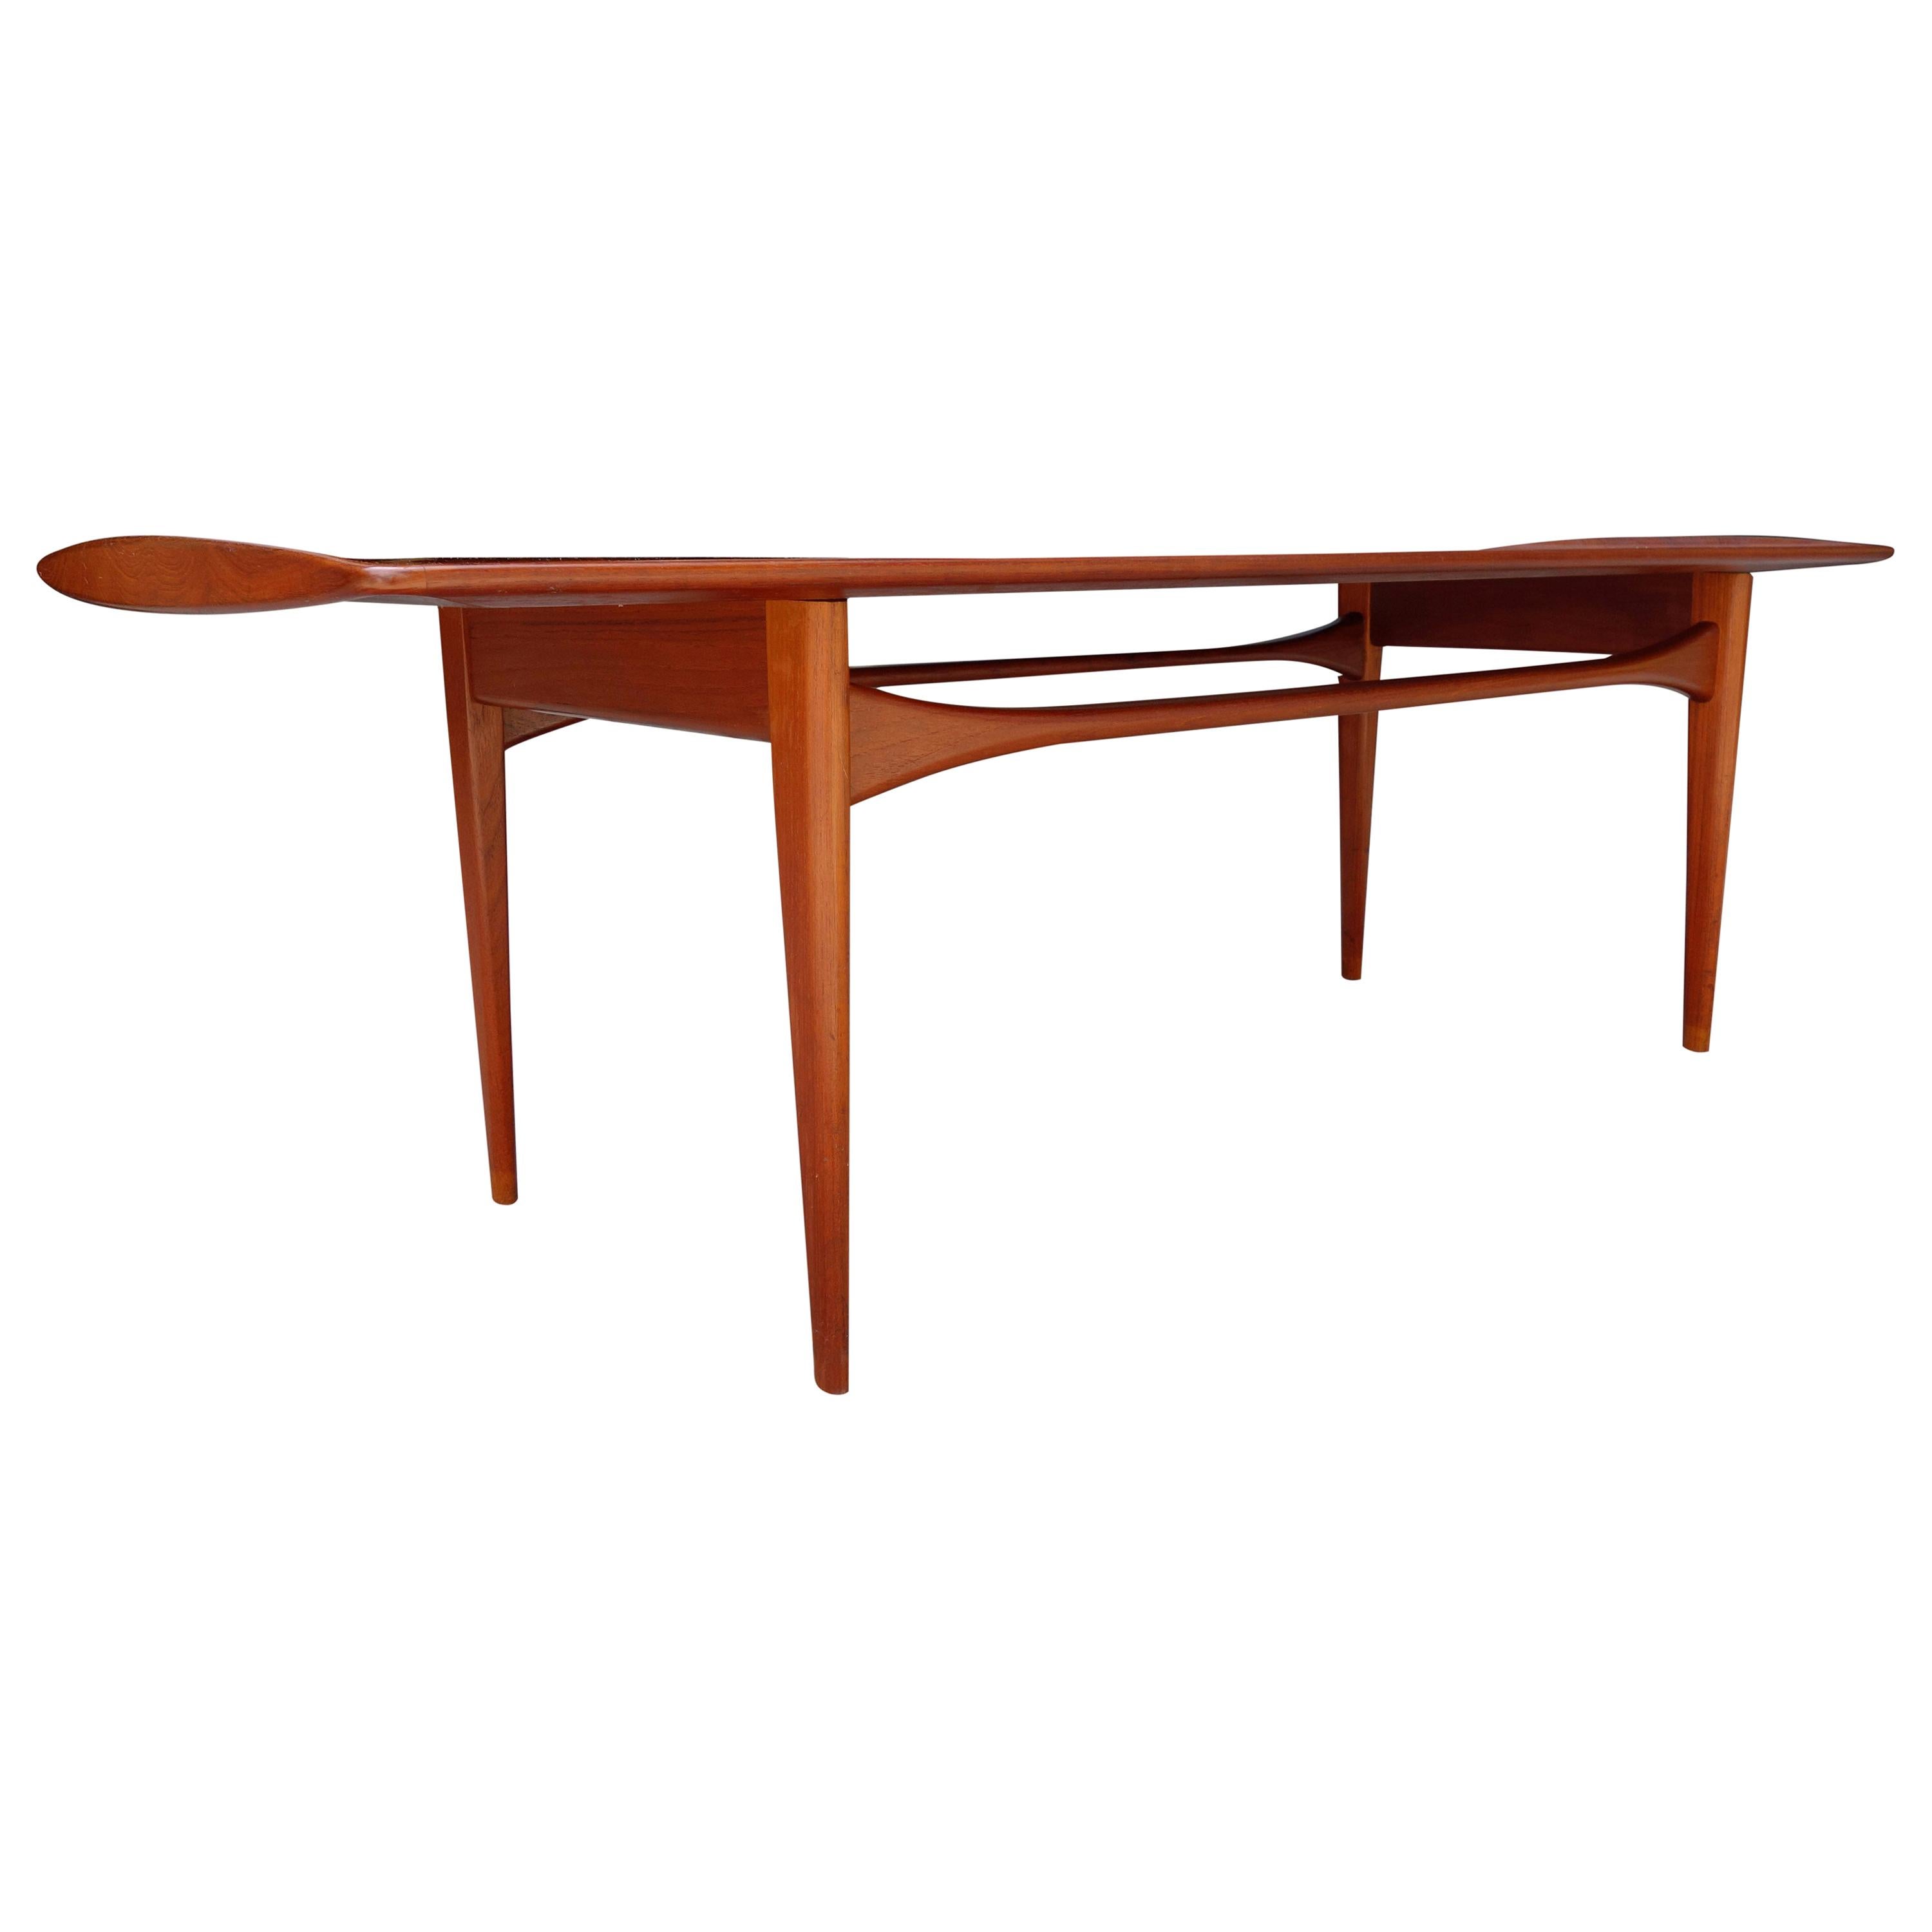 Mid-Century Modern Midcentury Danish Modern Coffee Table by Kindt-Larsen for France and Daverkosen For Sale